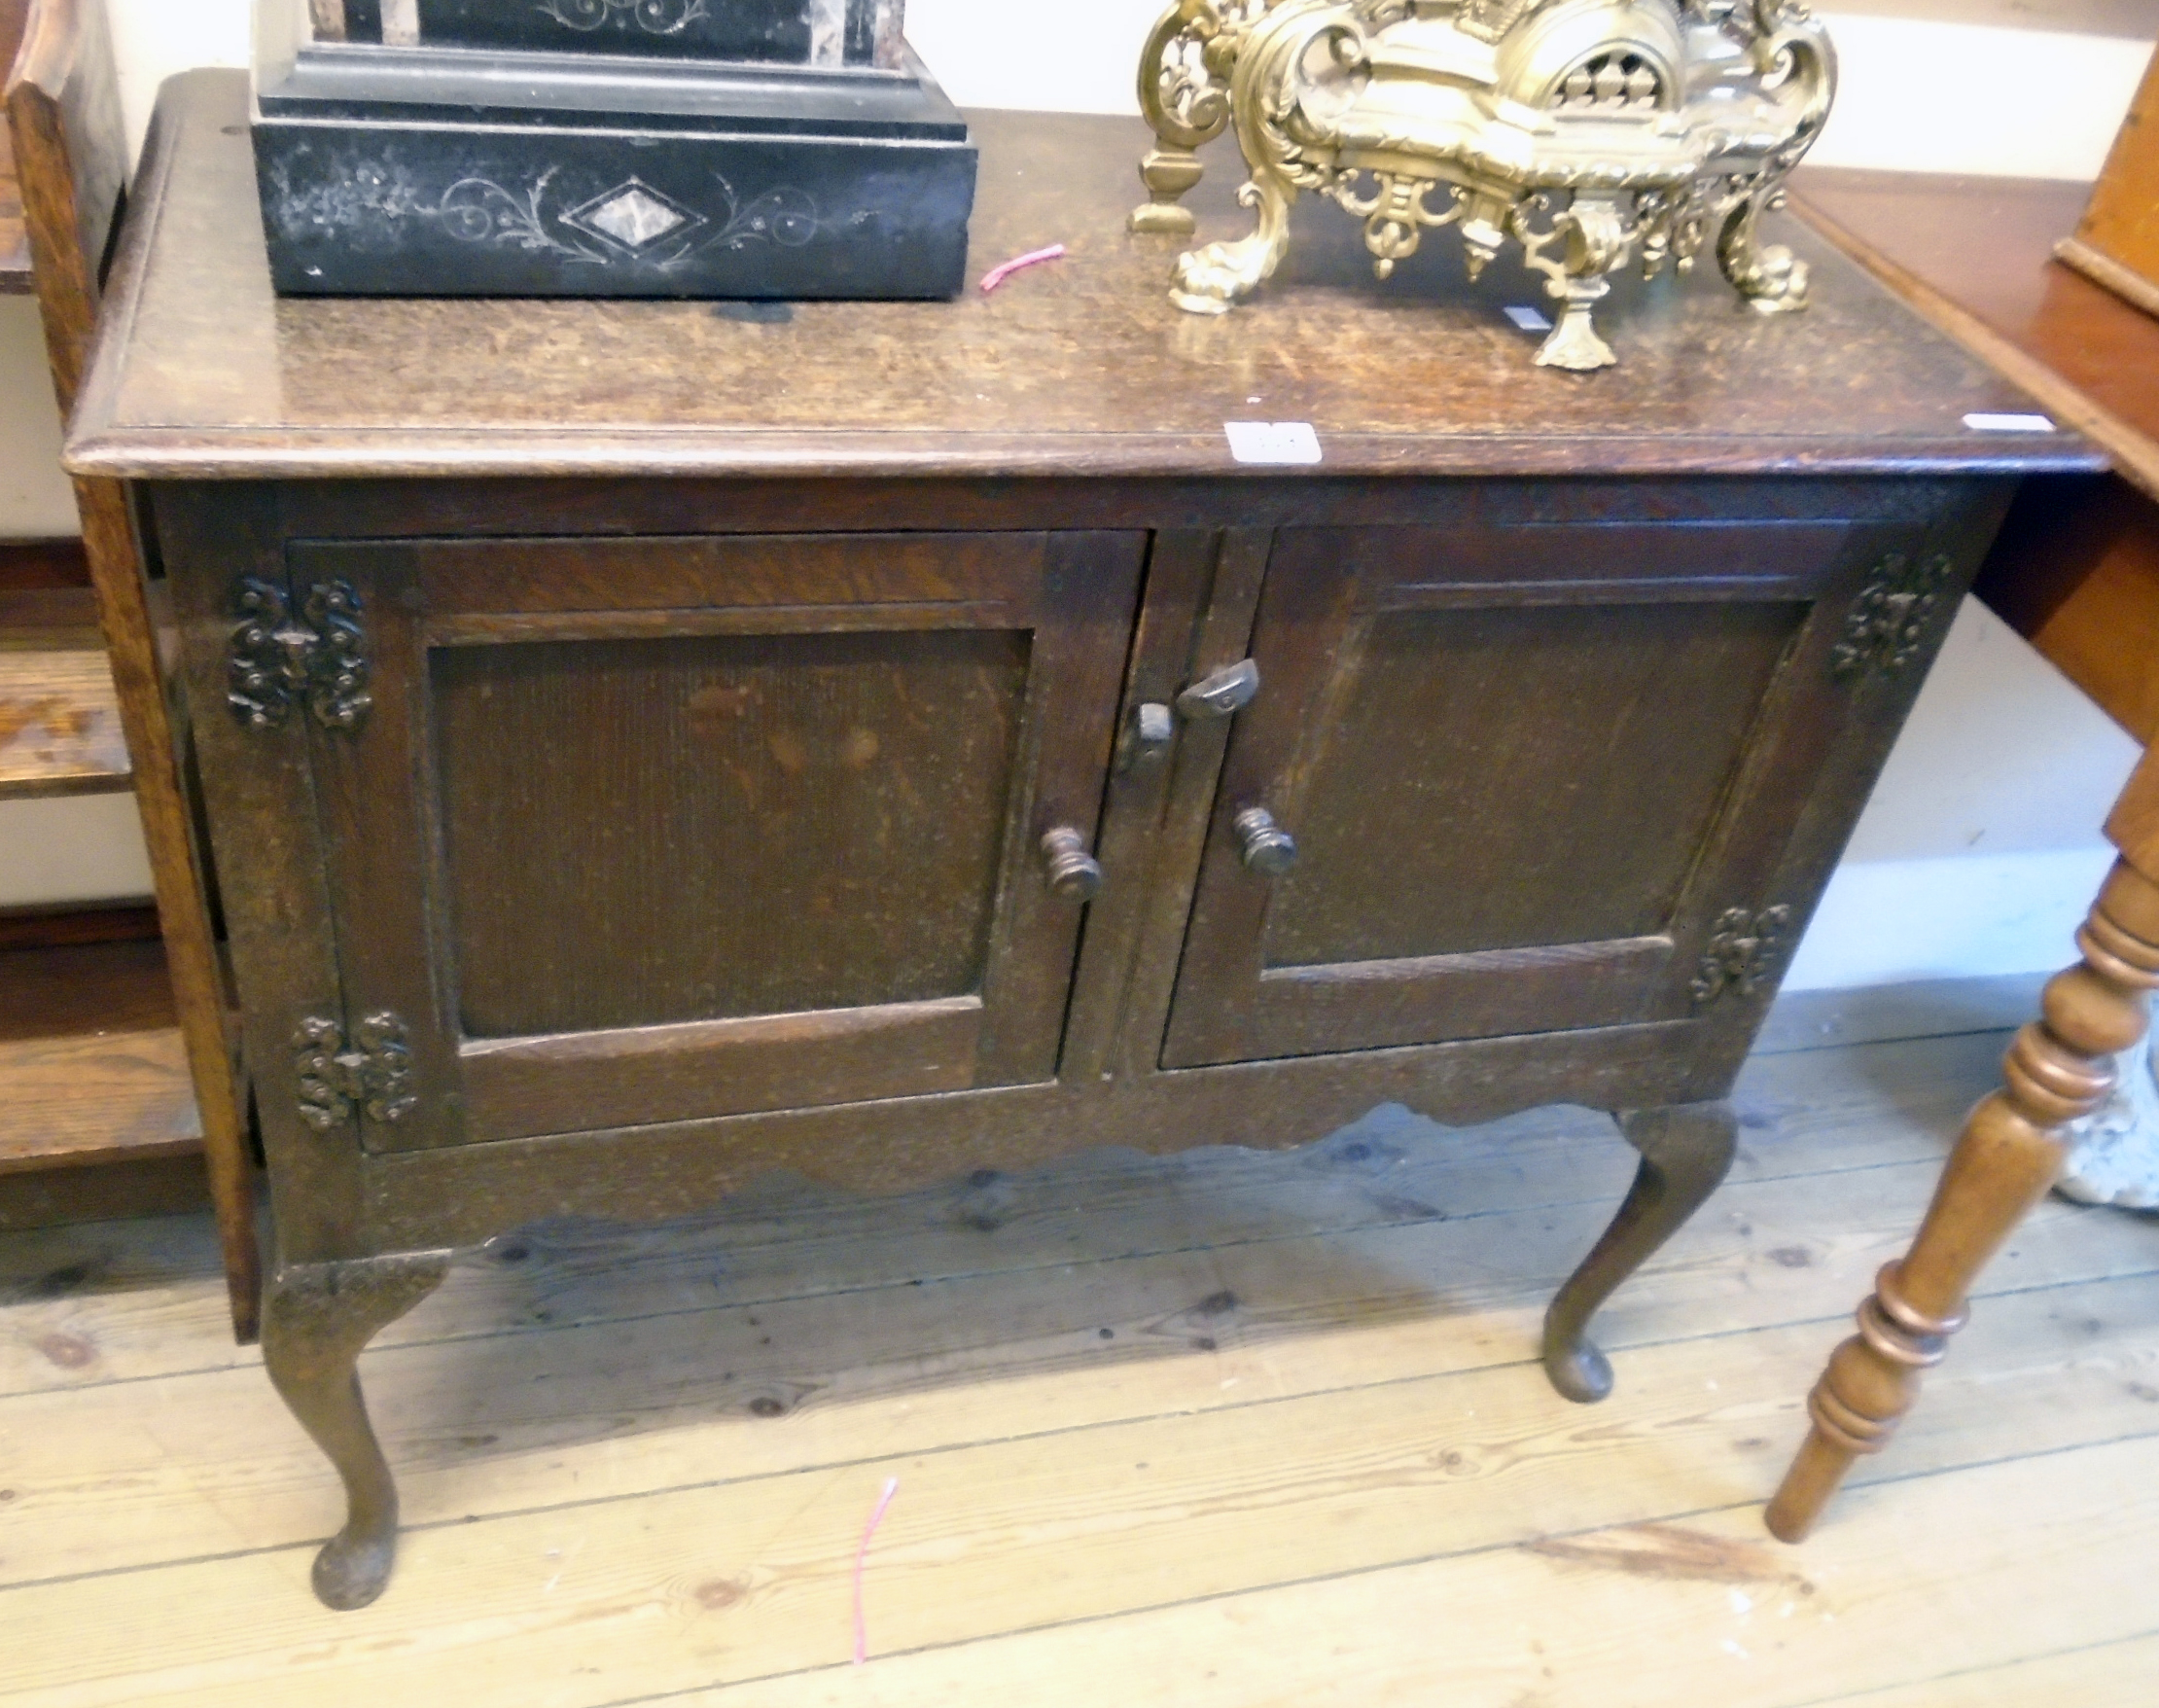 A 36" 20th Century polished oak two door dresser base, set on cabriole front legs with pad feet